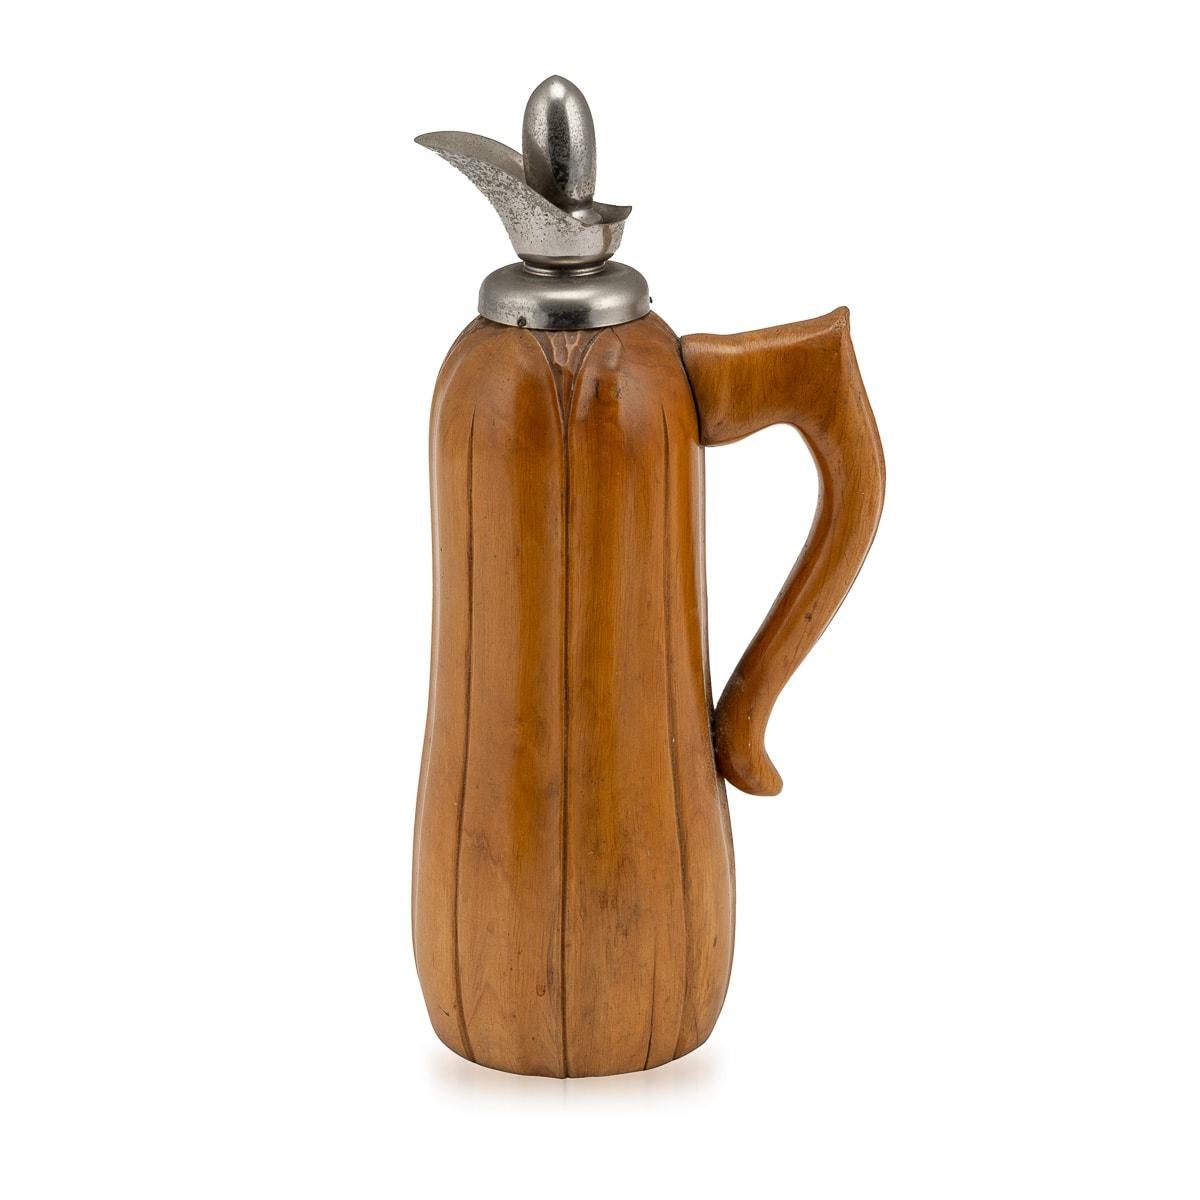 An Aldo Tura wood flask crafted for Macabo, Cusano Milanino, made in Italy around the 1960s. This exquisite piece reflects the distinctive style of Aldo Tura, a renowned Italian designer known for his innovative and luxurious creations. The carved